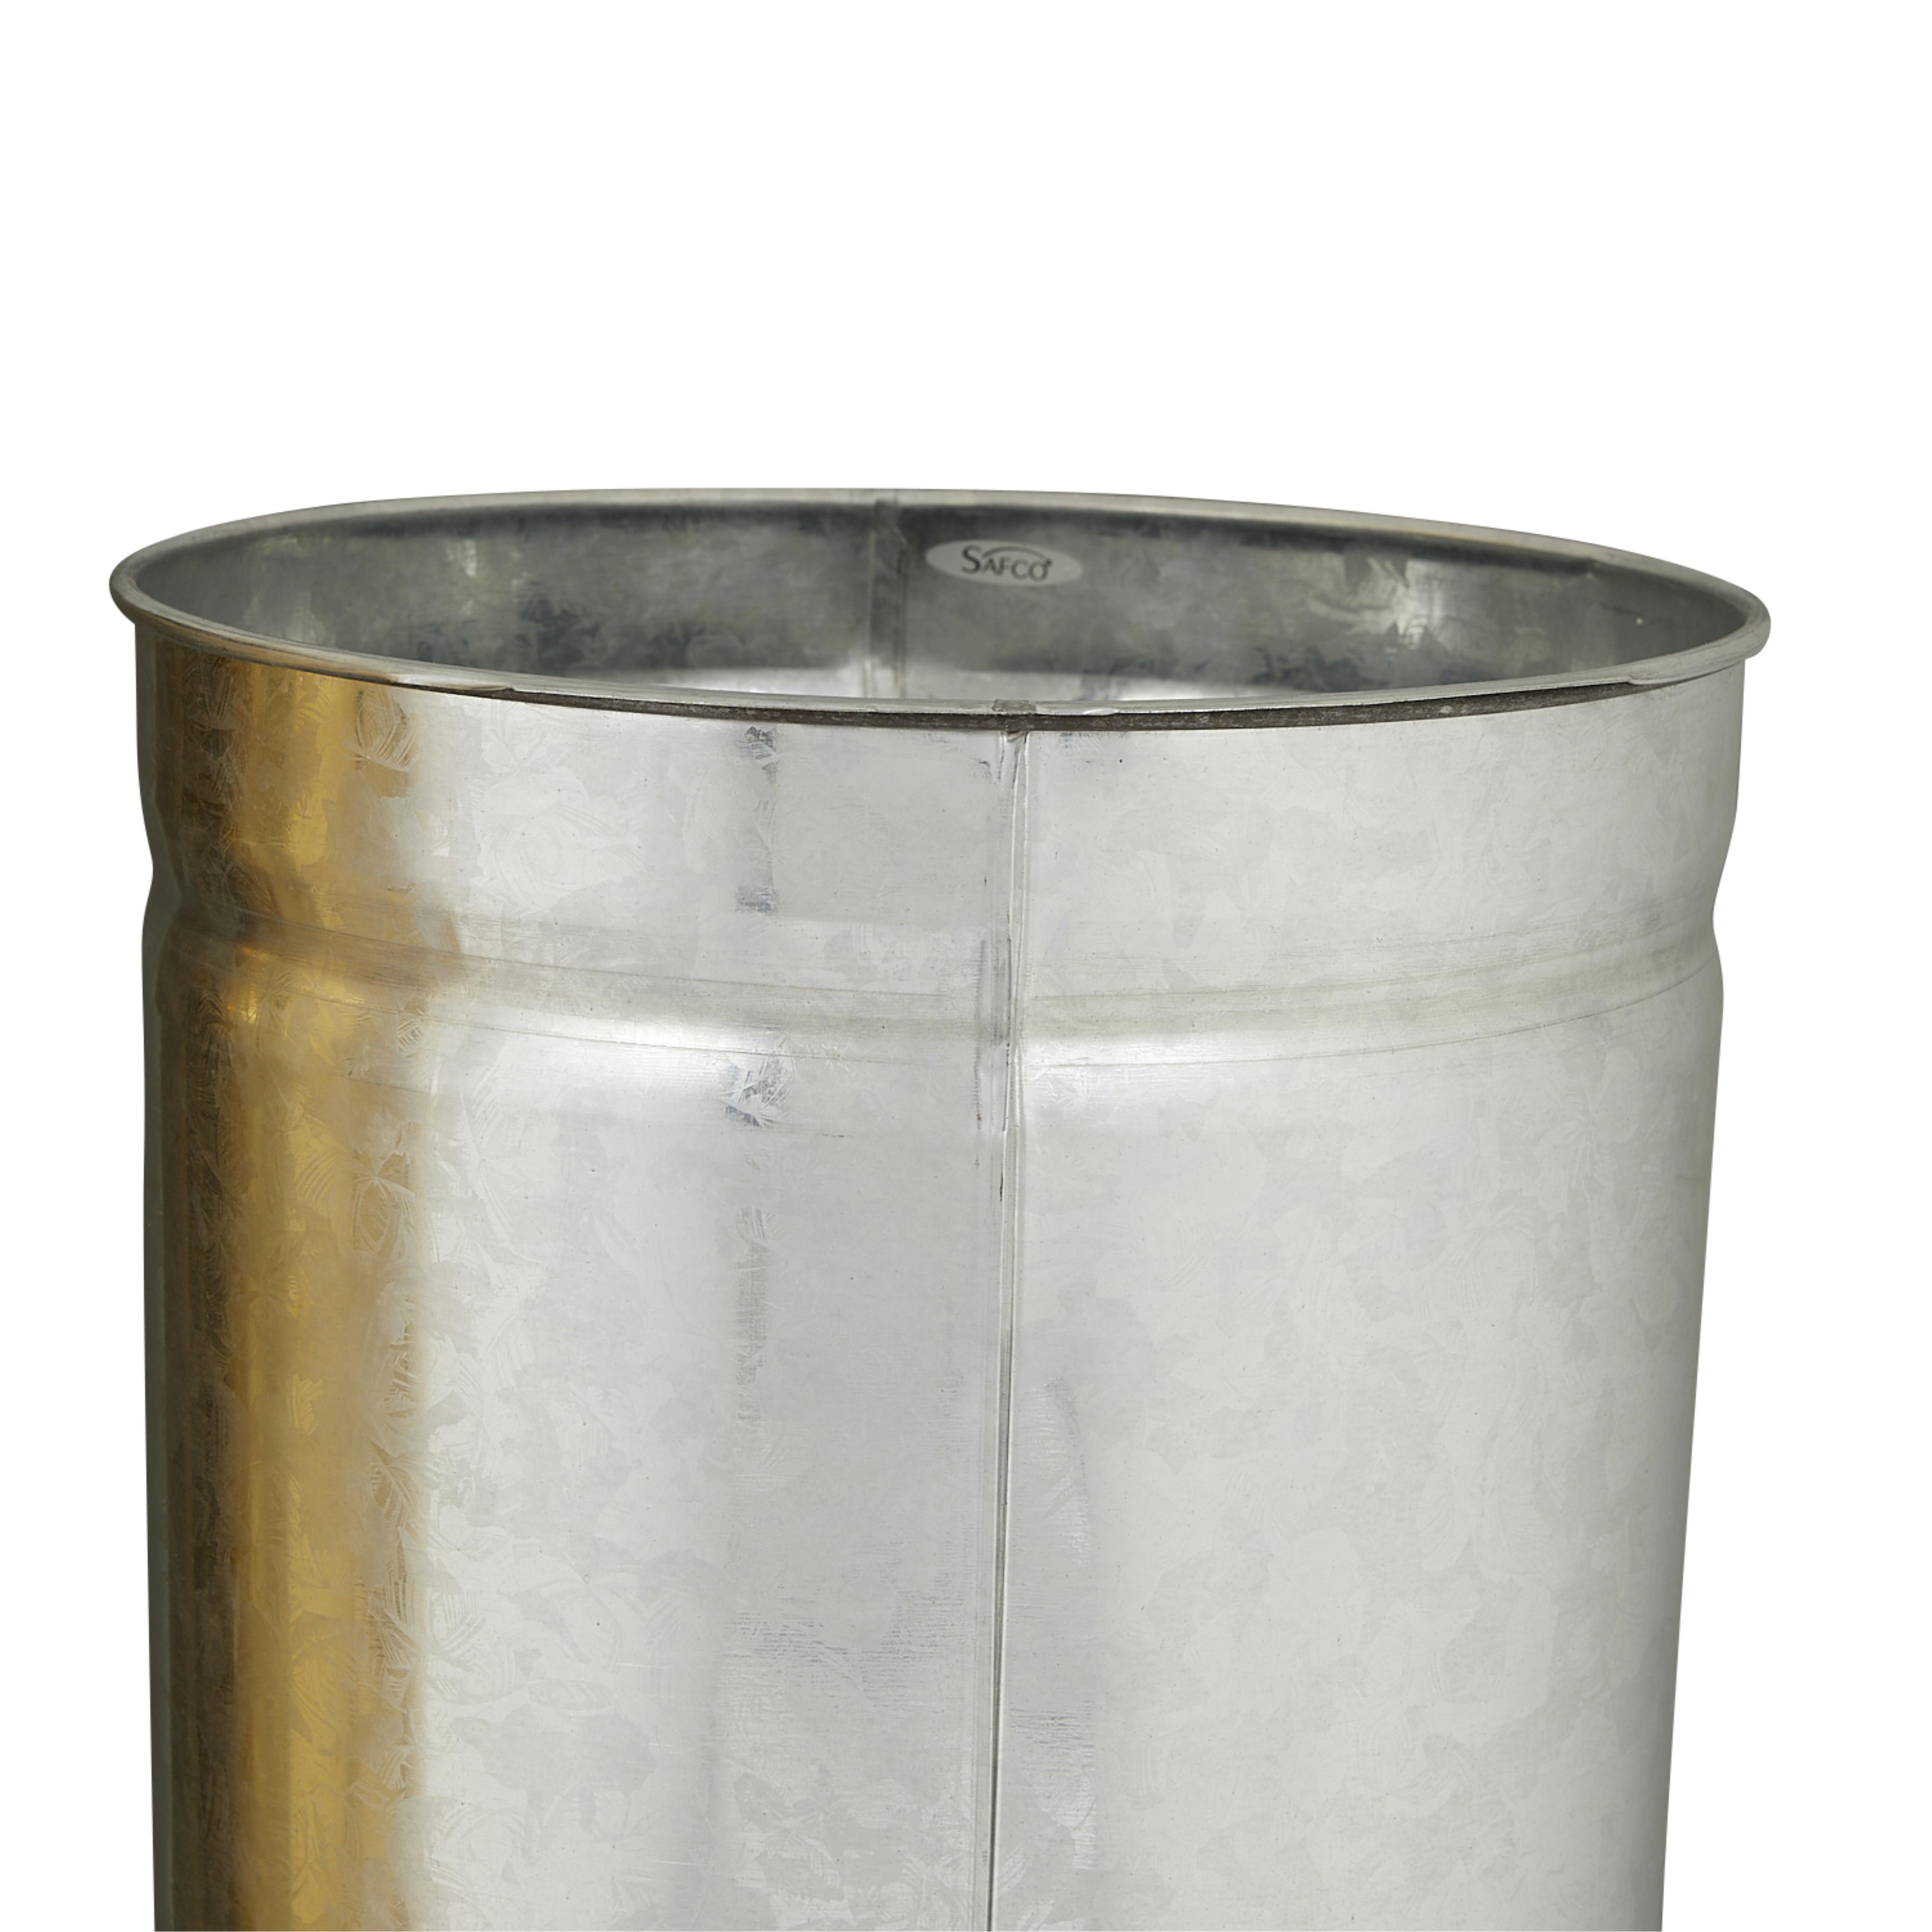 Joe Smith Gold-Tone Garbage Can 2008 - Image 10 of 12